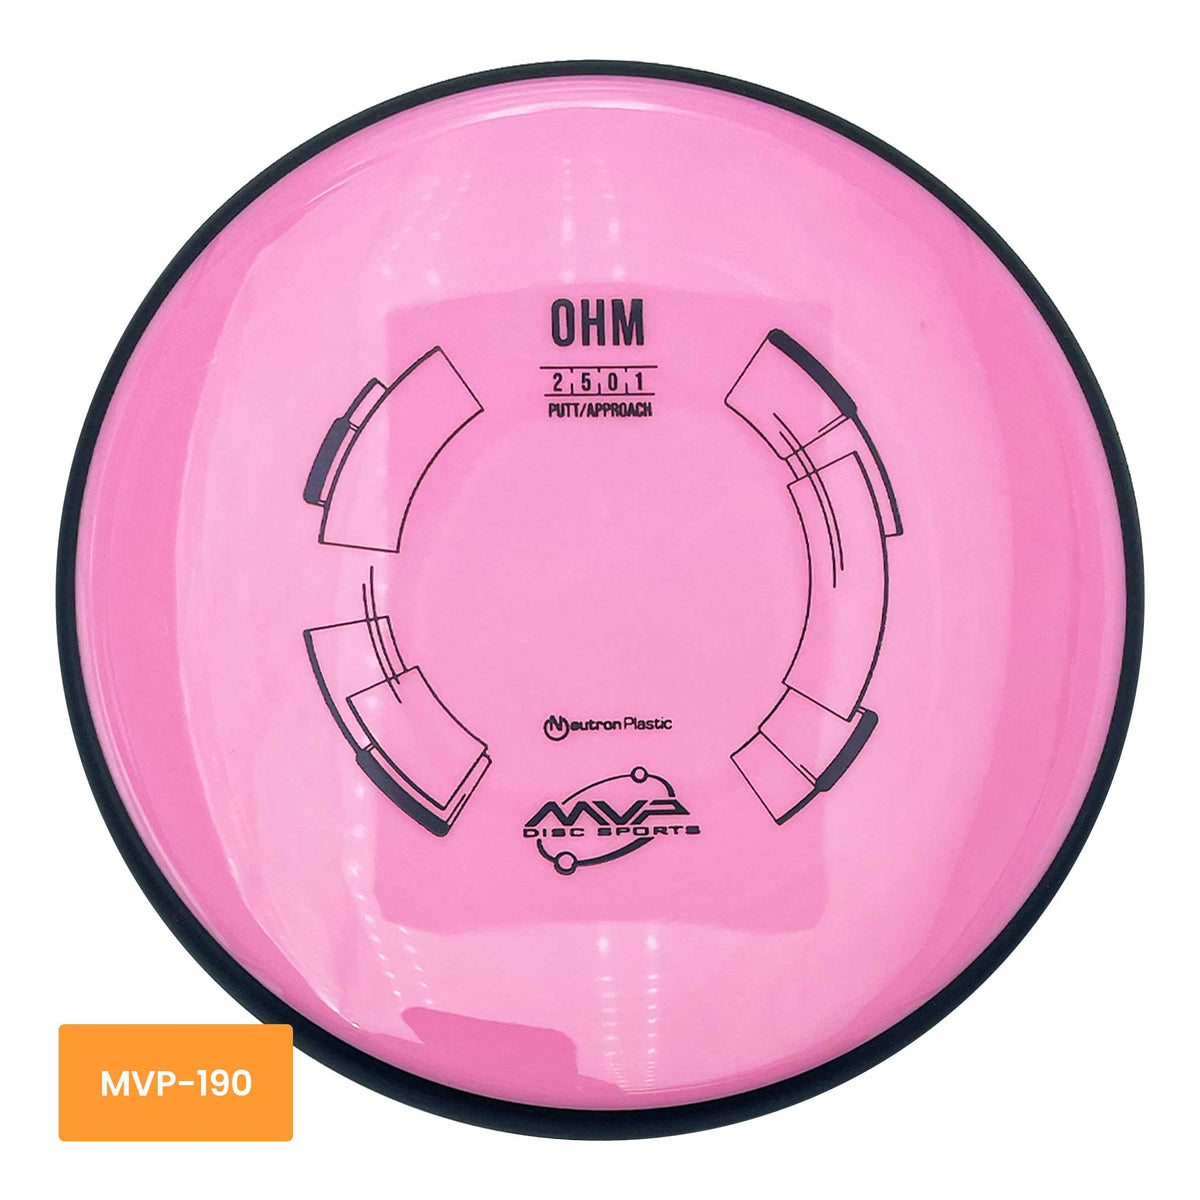 MVP Disc Sports Neutron Ohm putter and approach - Pink